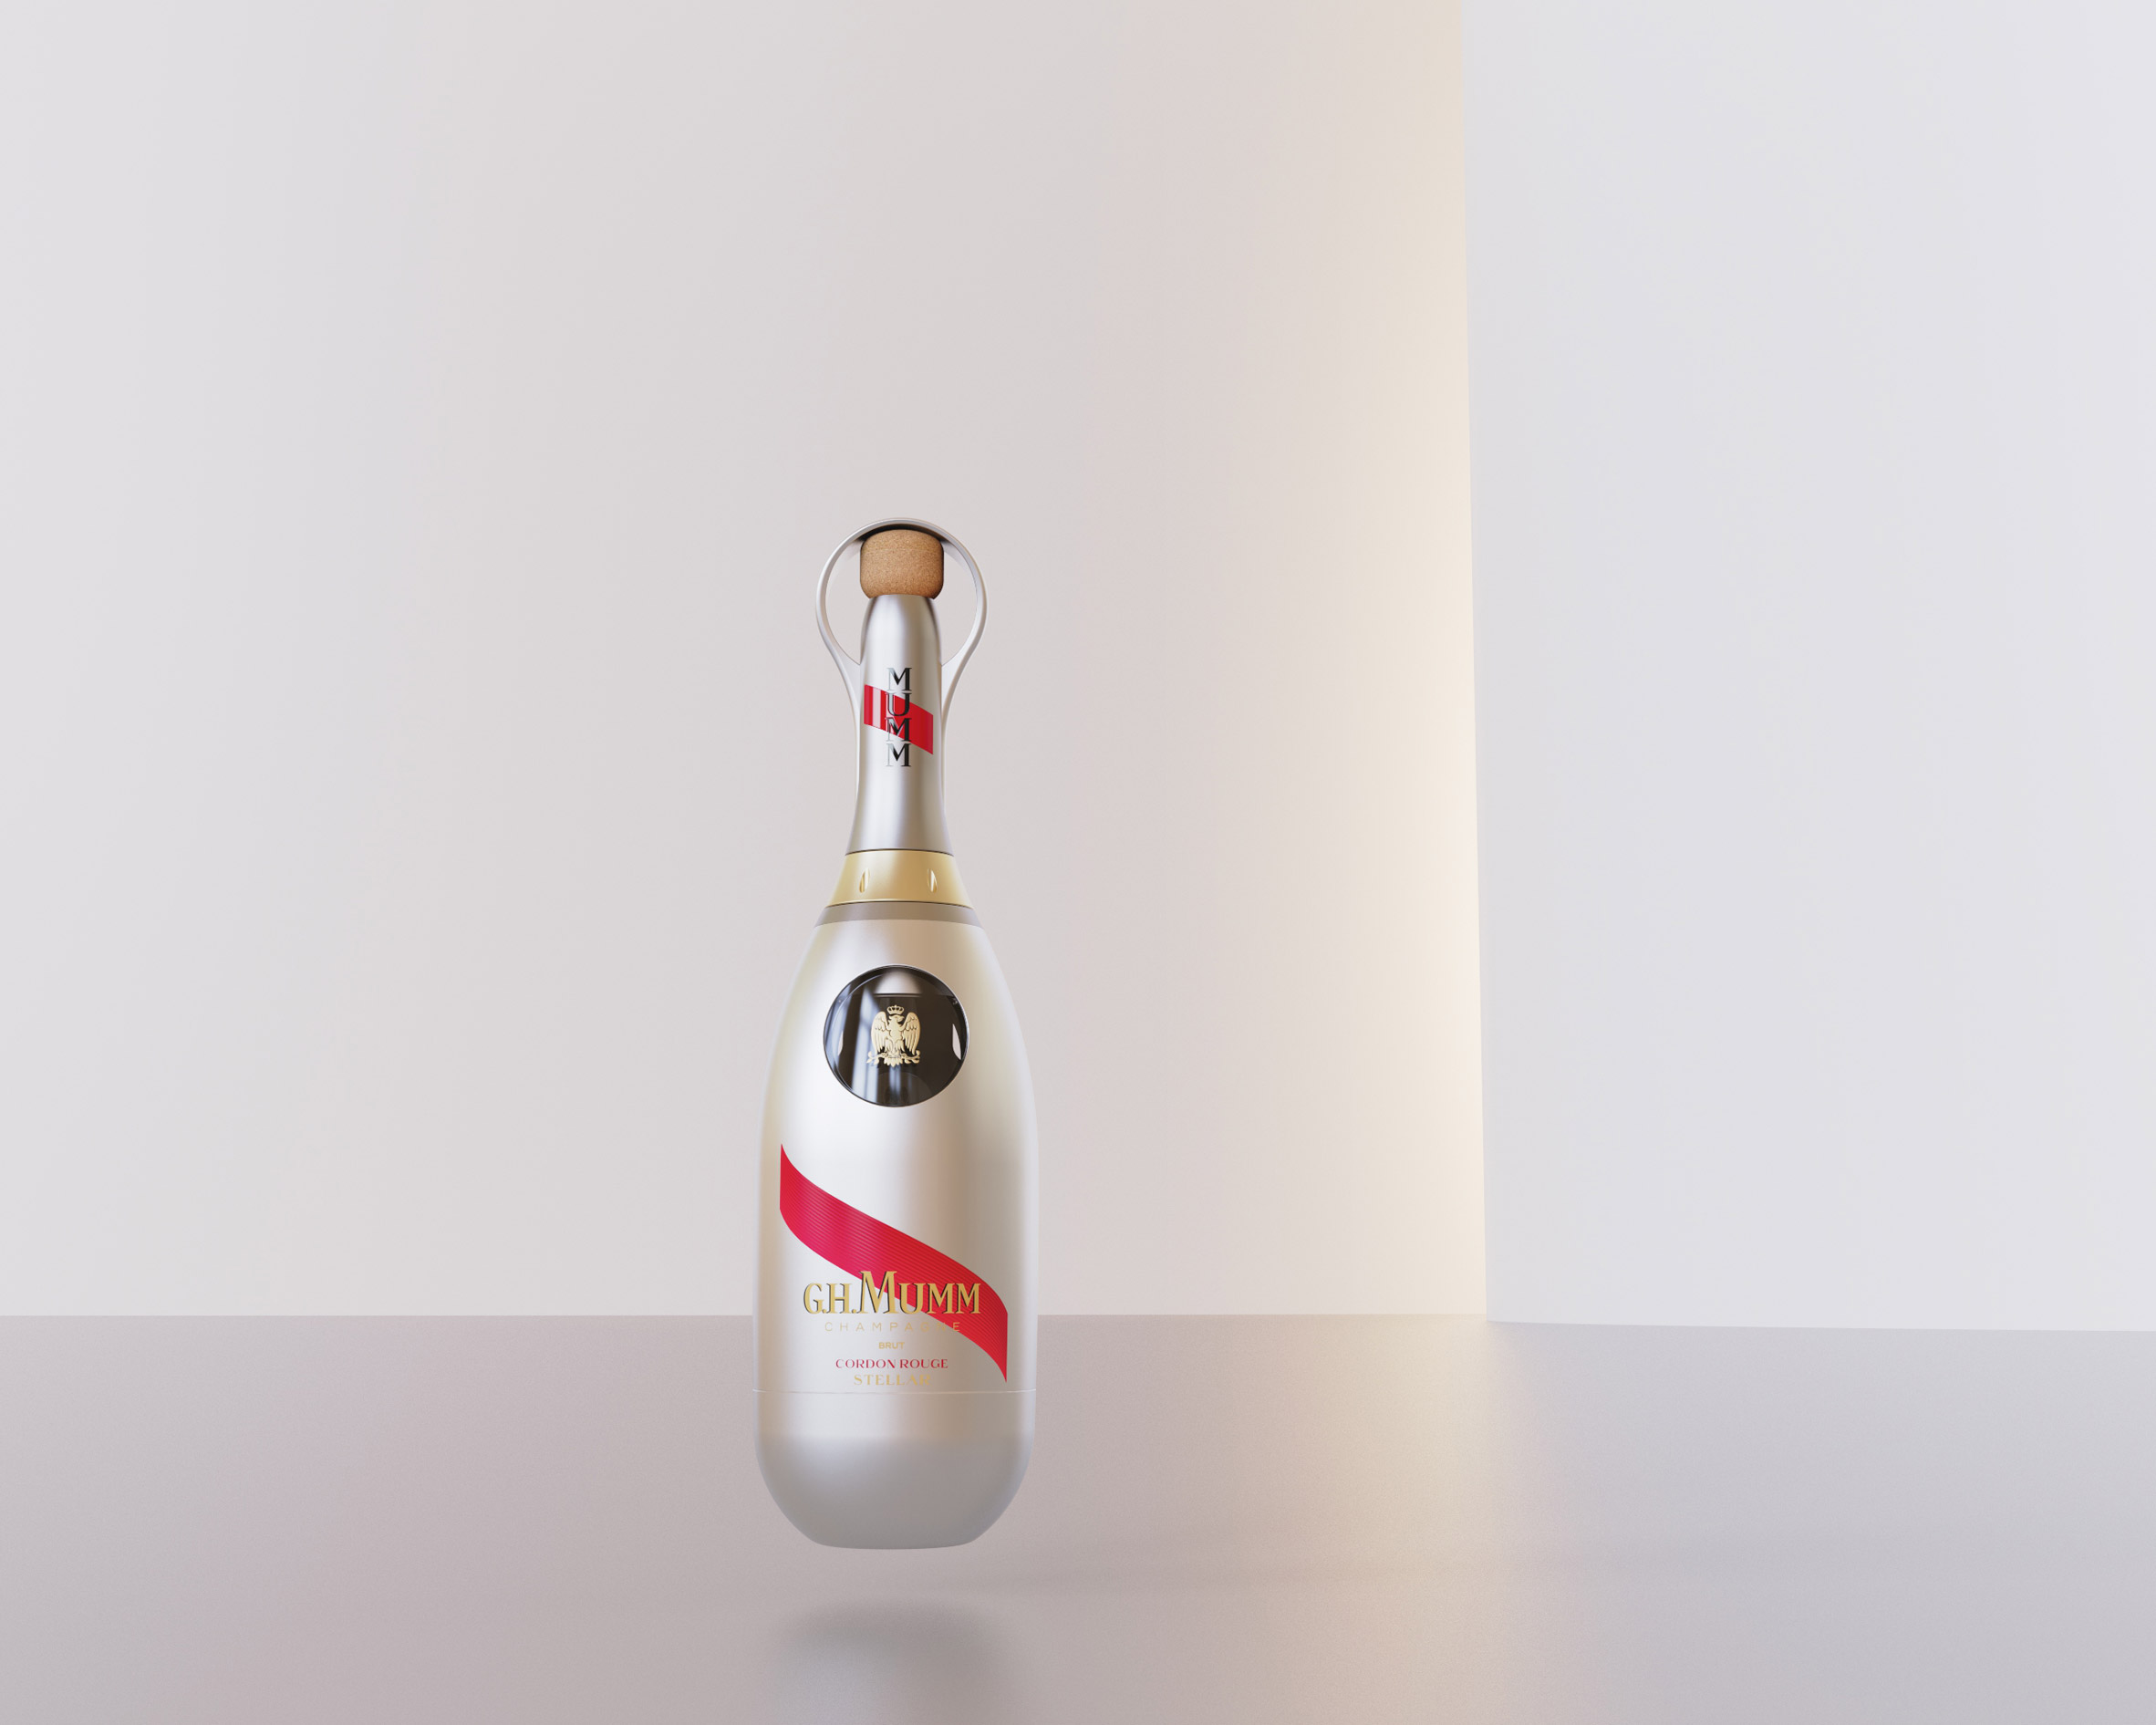 A silver champagne bottle on a pastel background